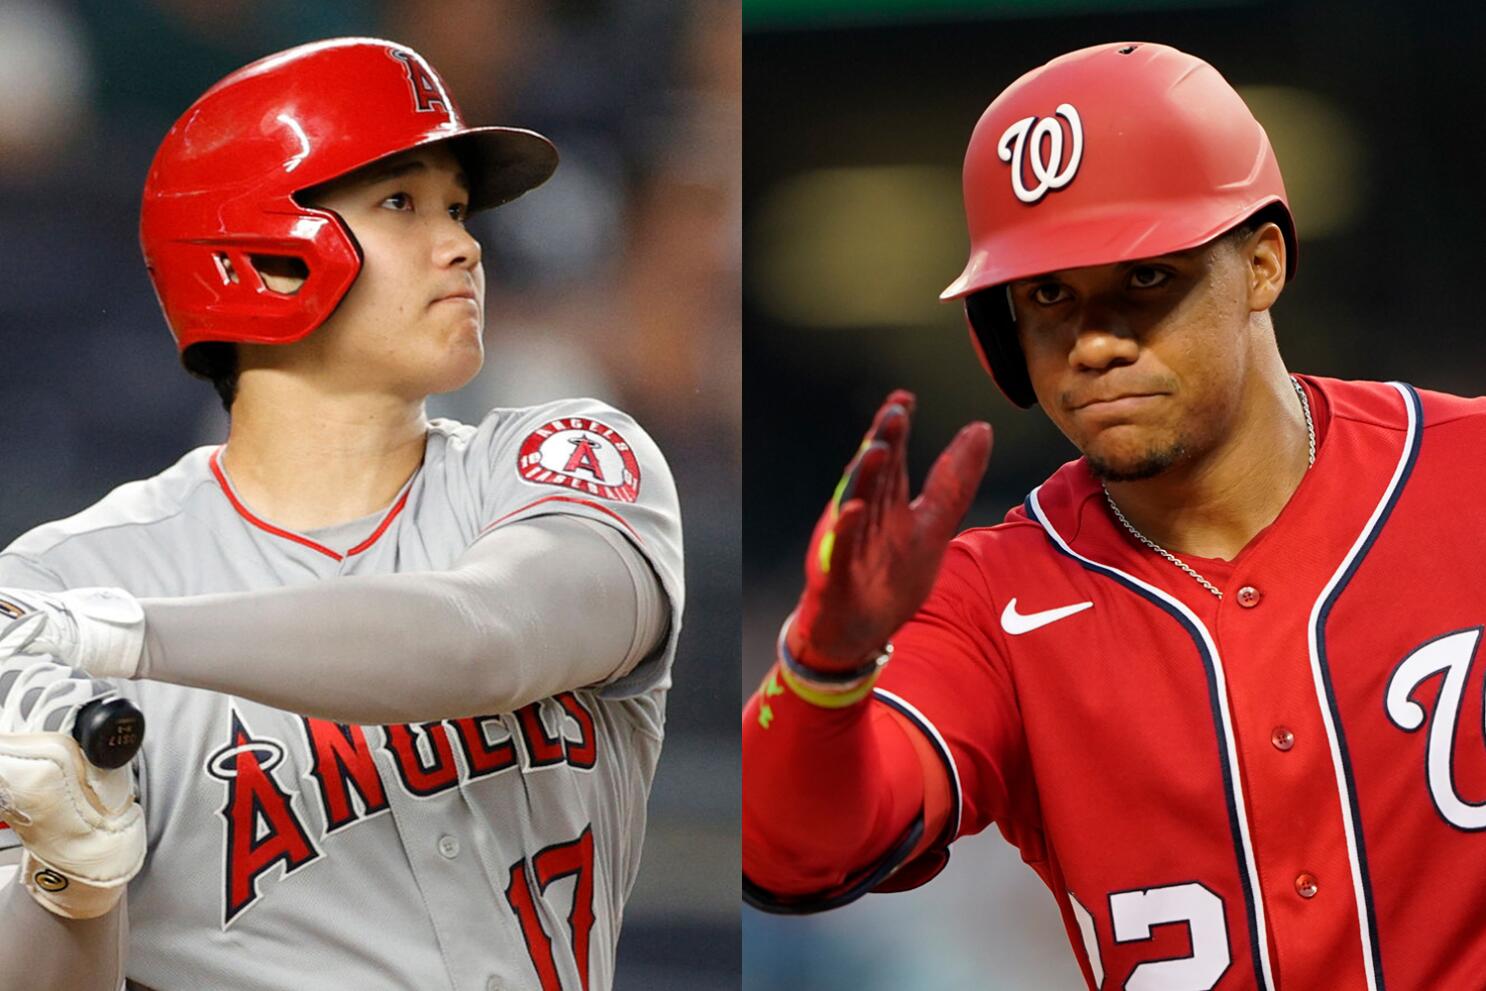 With Juan Soto Available, the Nationals Have Upended the Trade Market